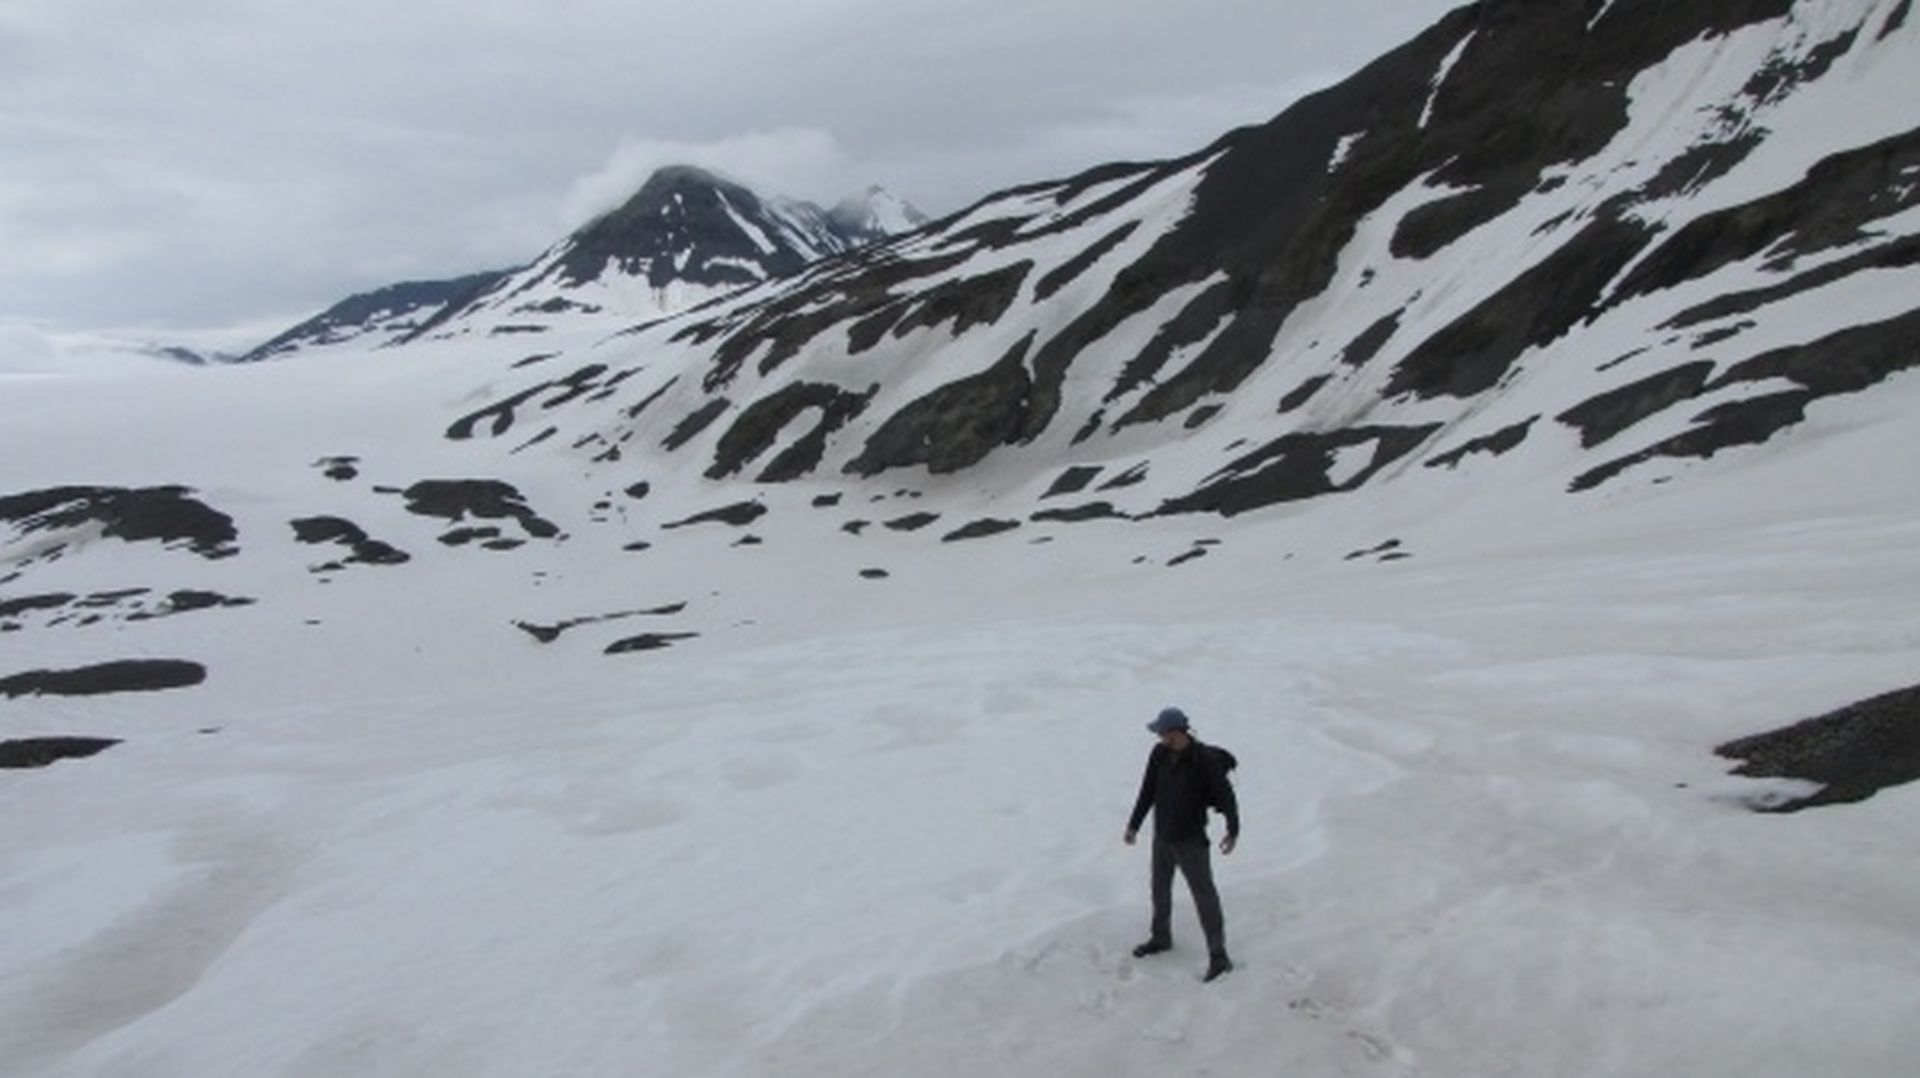 Harding Ice Field nr Seward - man attempts world`s highest "catalogue pose" once perfected "Jockey Y-Fronts" ready to model